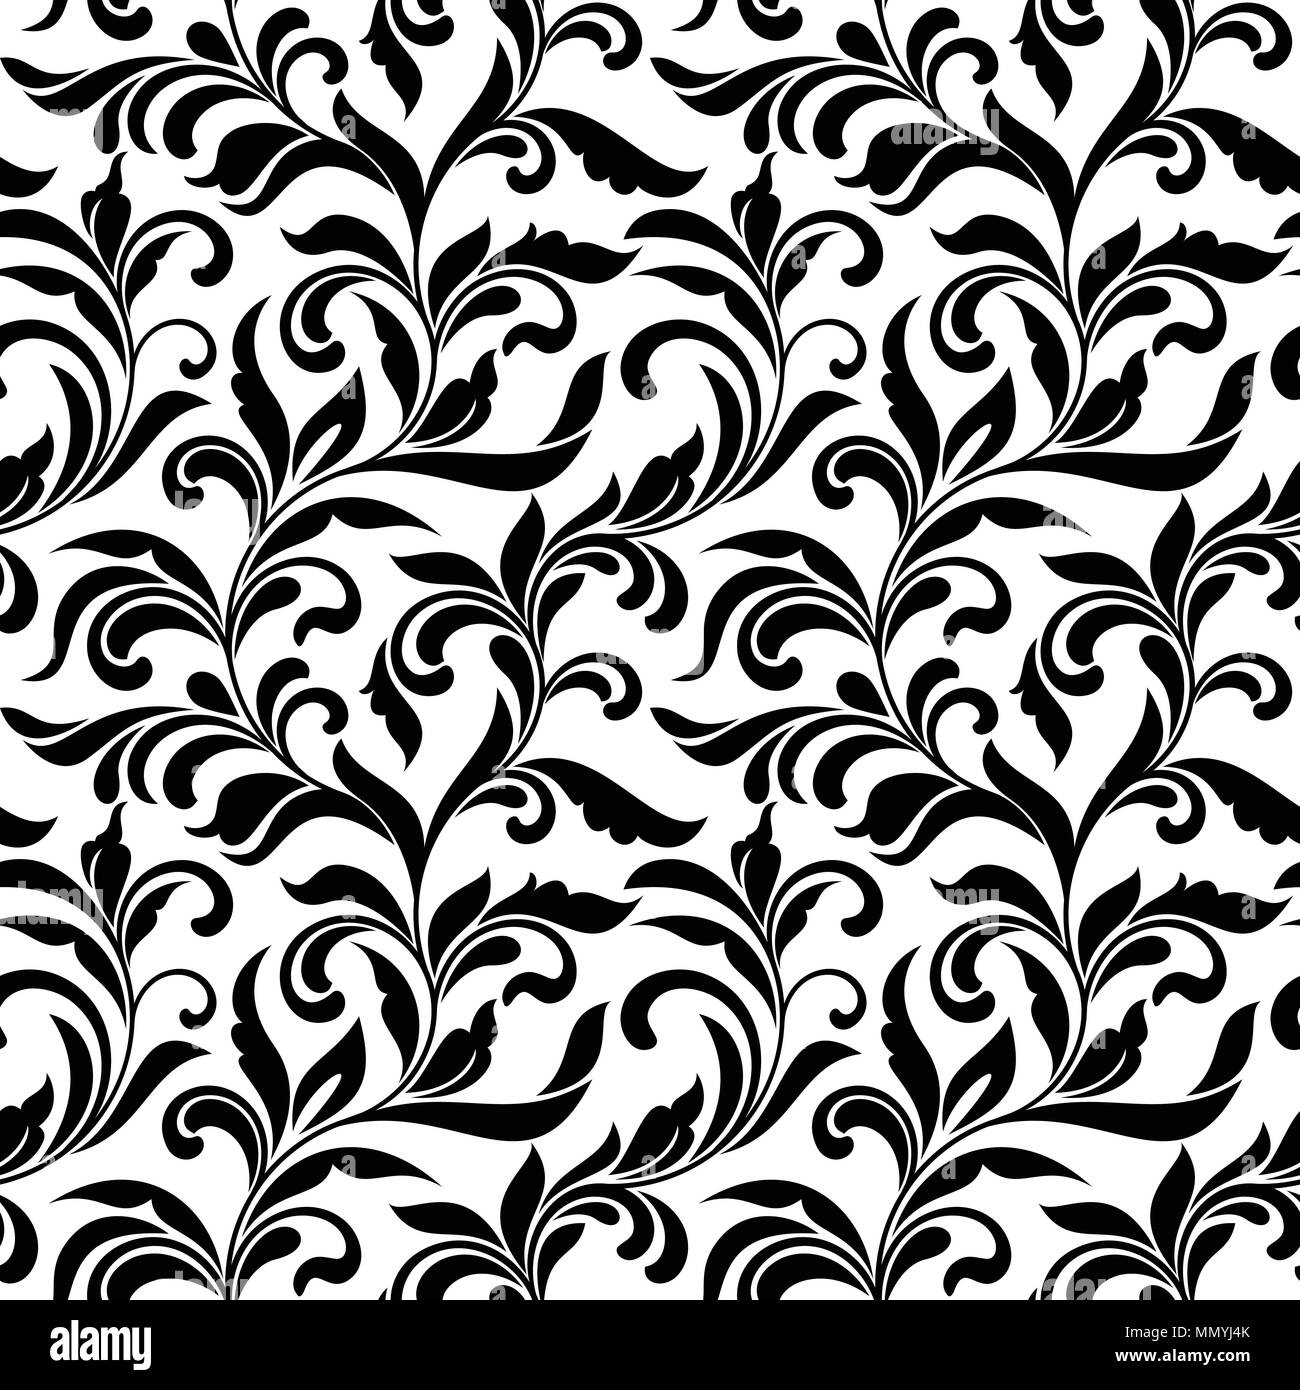 Elegant seamless pattern. Tracery of swirls and decorative leaves